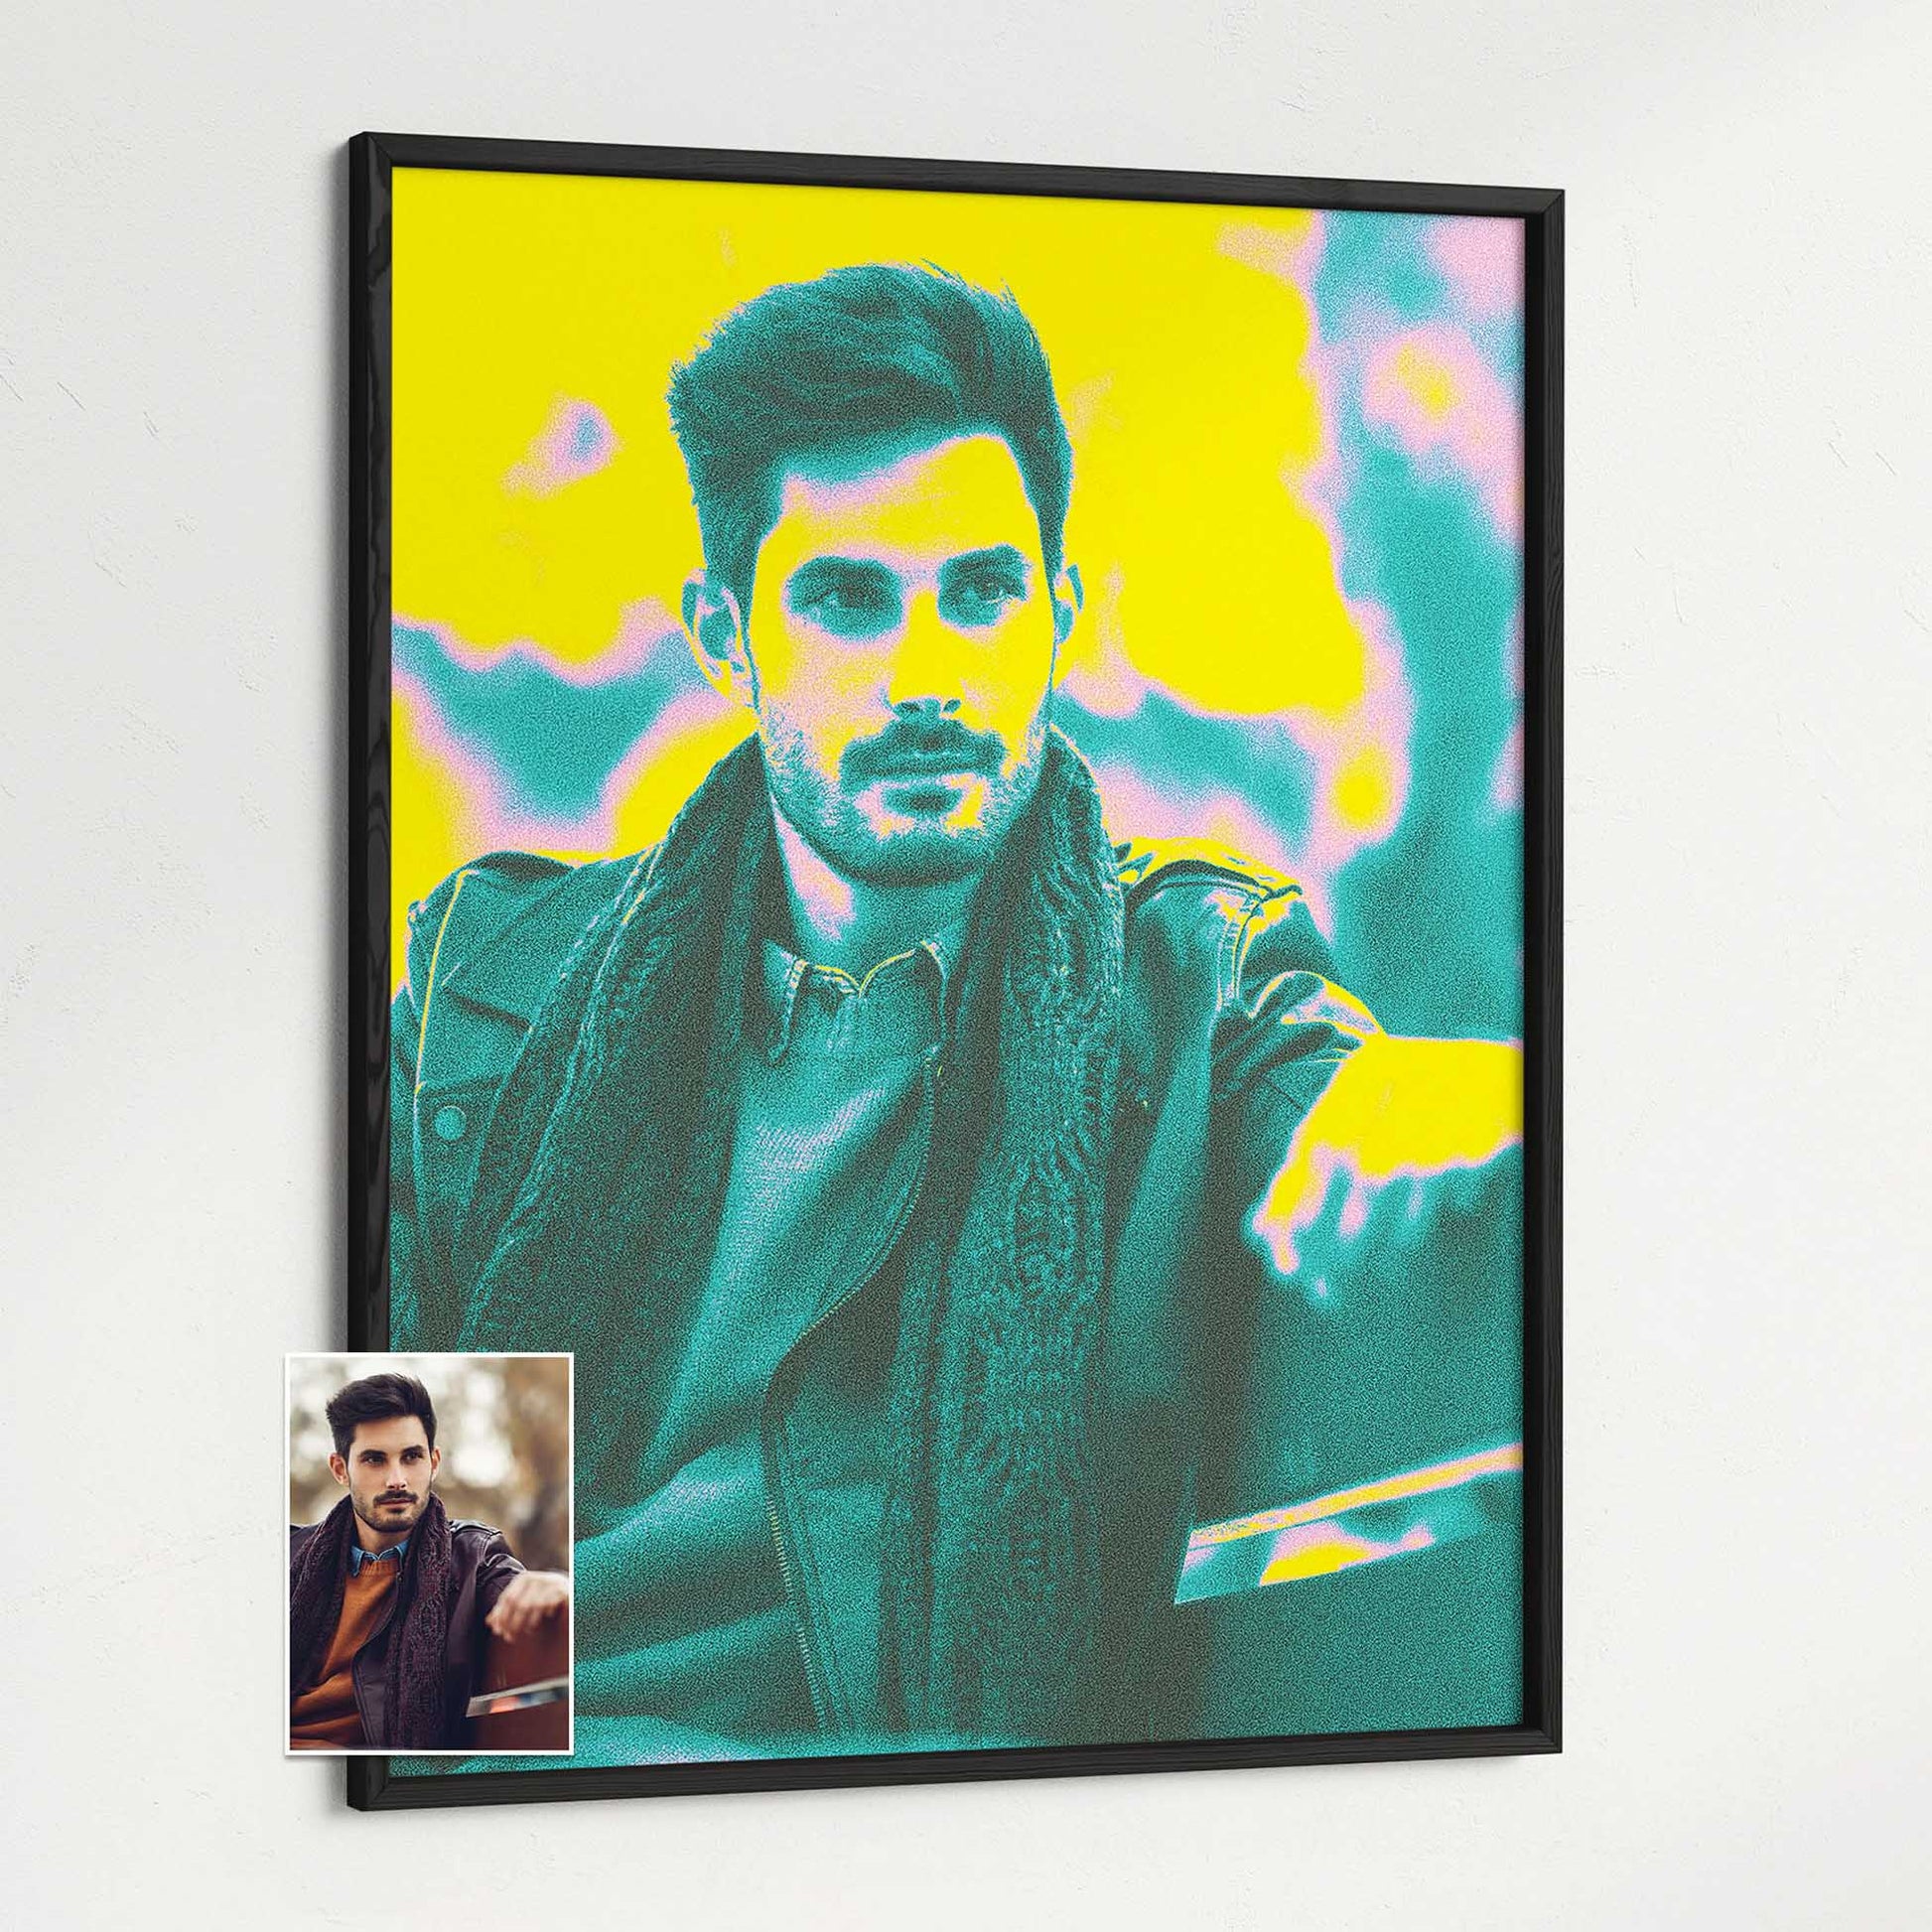 Transform your home decor with the vibrant and colorful Personalised Acid Yellow Framed Print. Its bright and vivid design brings a unique and creative element to your interior design. Crafted with a wooden frame and printed thick paper